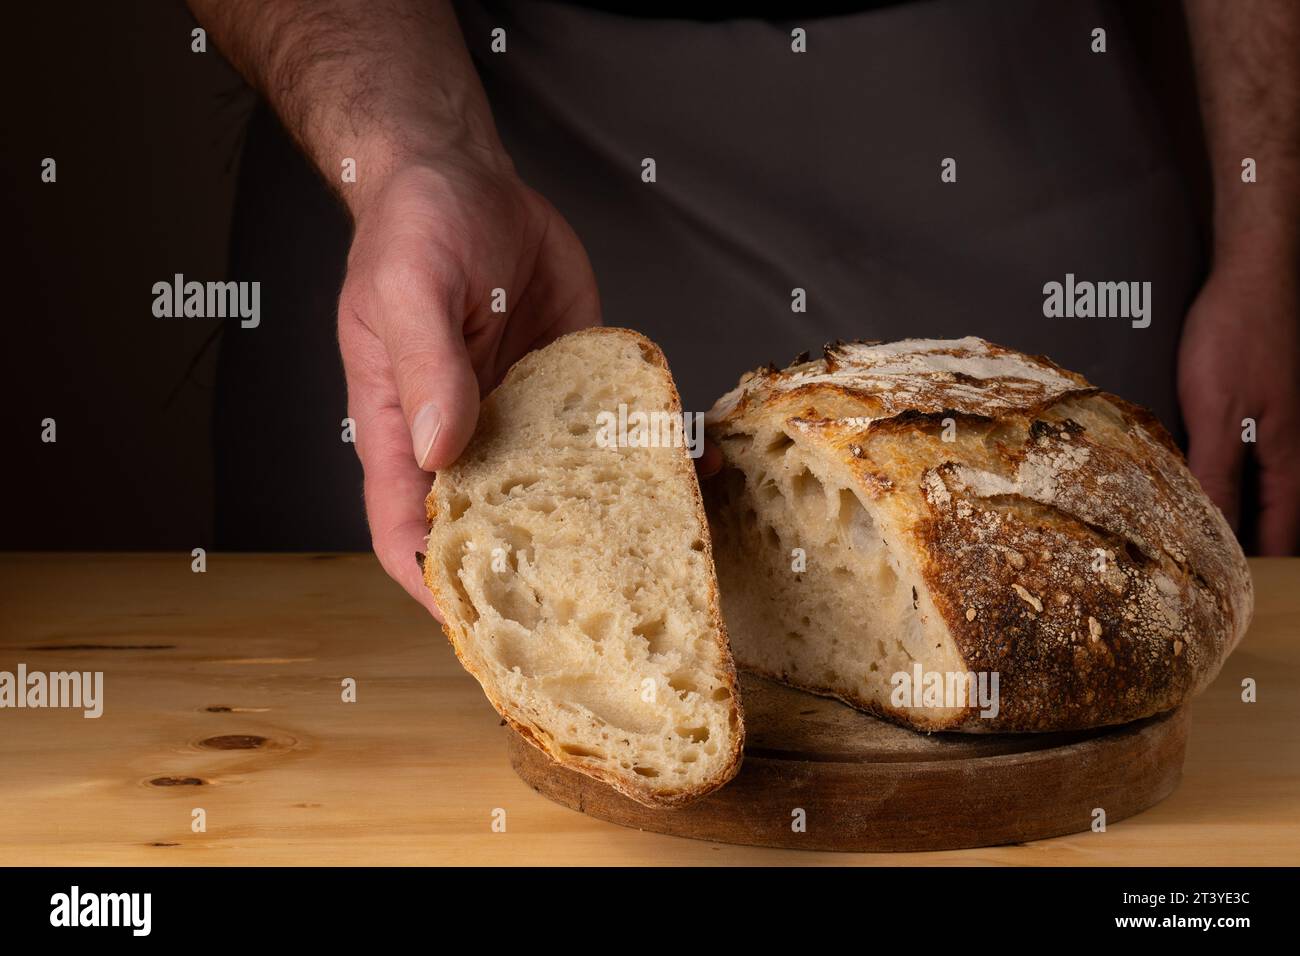 The hands of a young man handling sourdough bread, highlighting the bread with beautiful golden tones against the dark background. Stock Photo